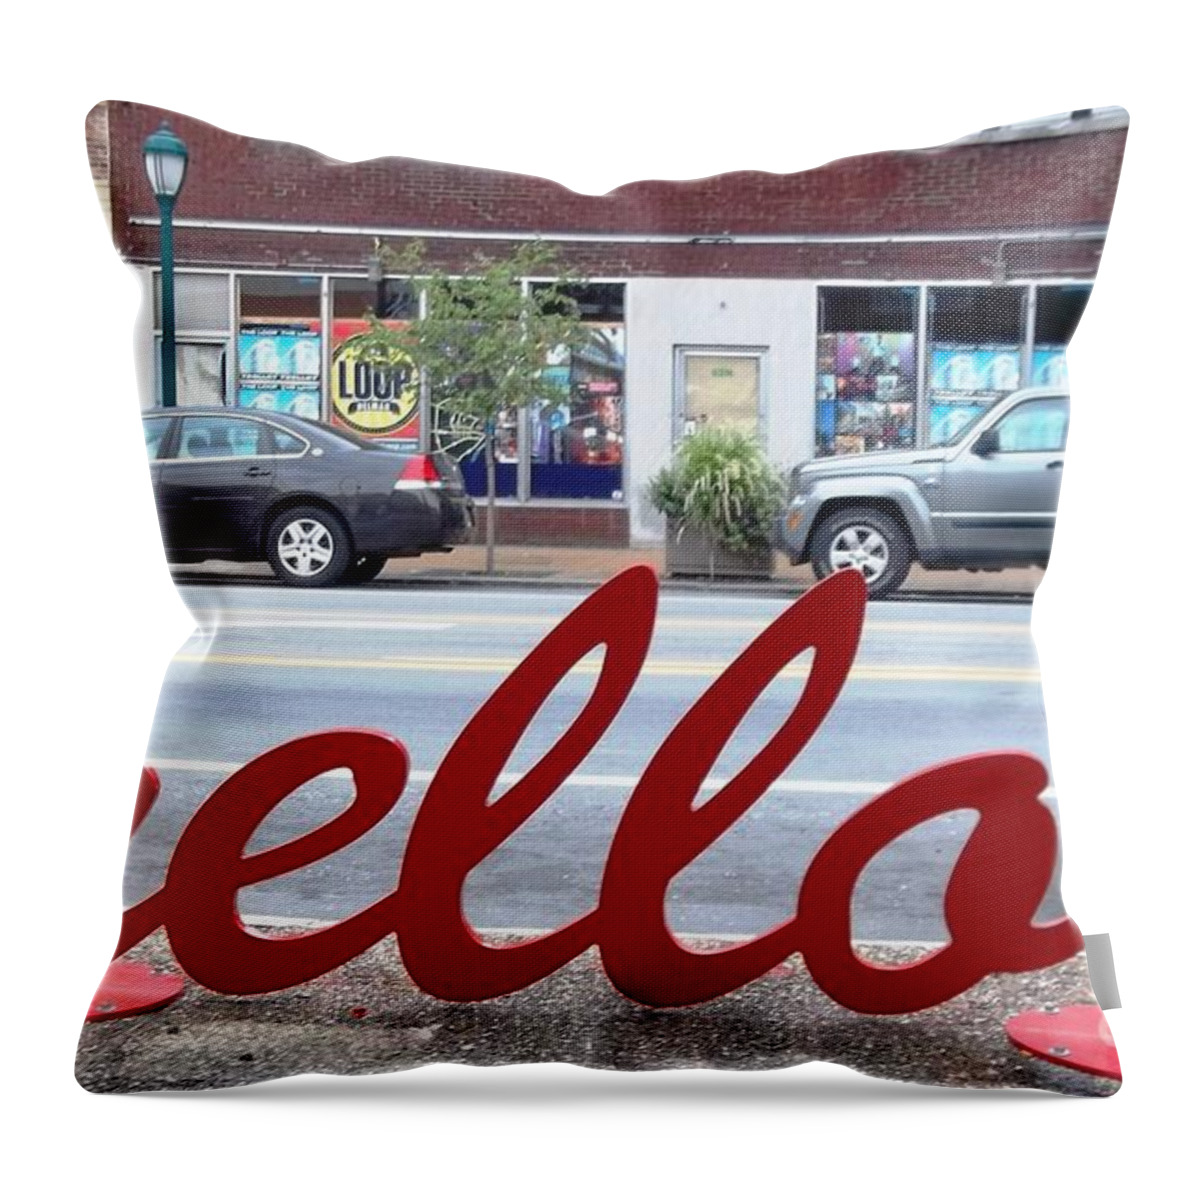  Throw Pillow featuring the photograph Hello by Kelly Awad